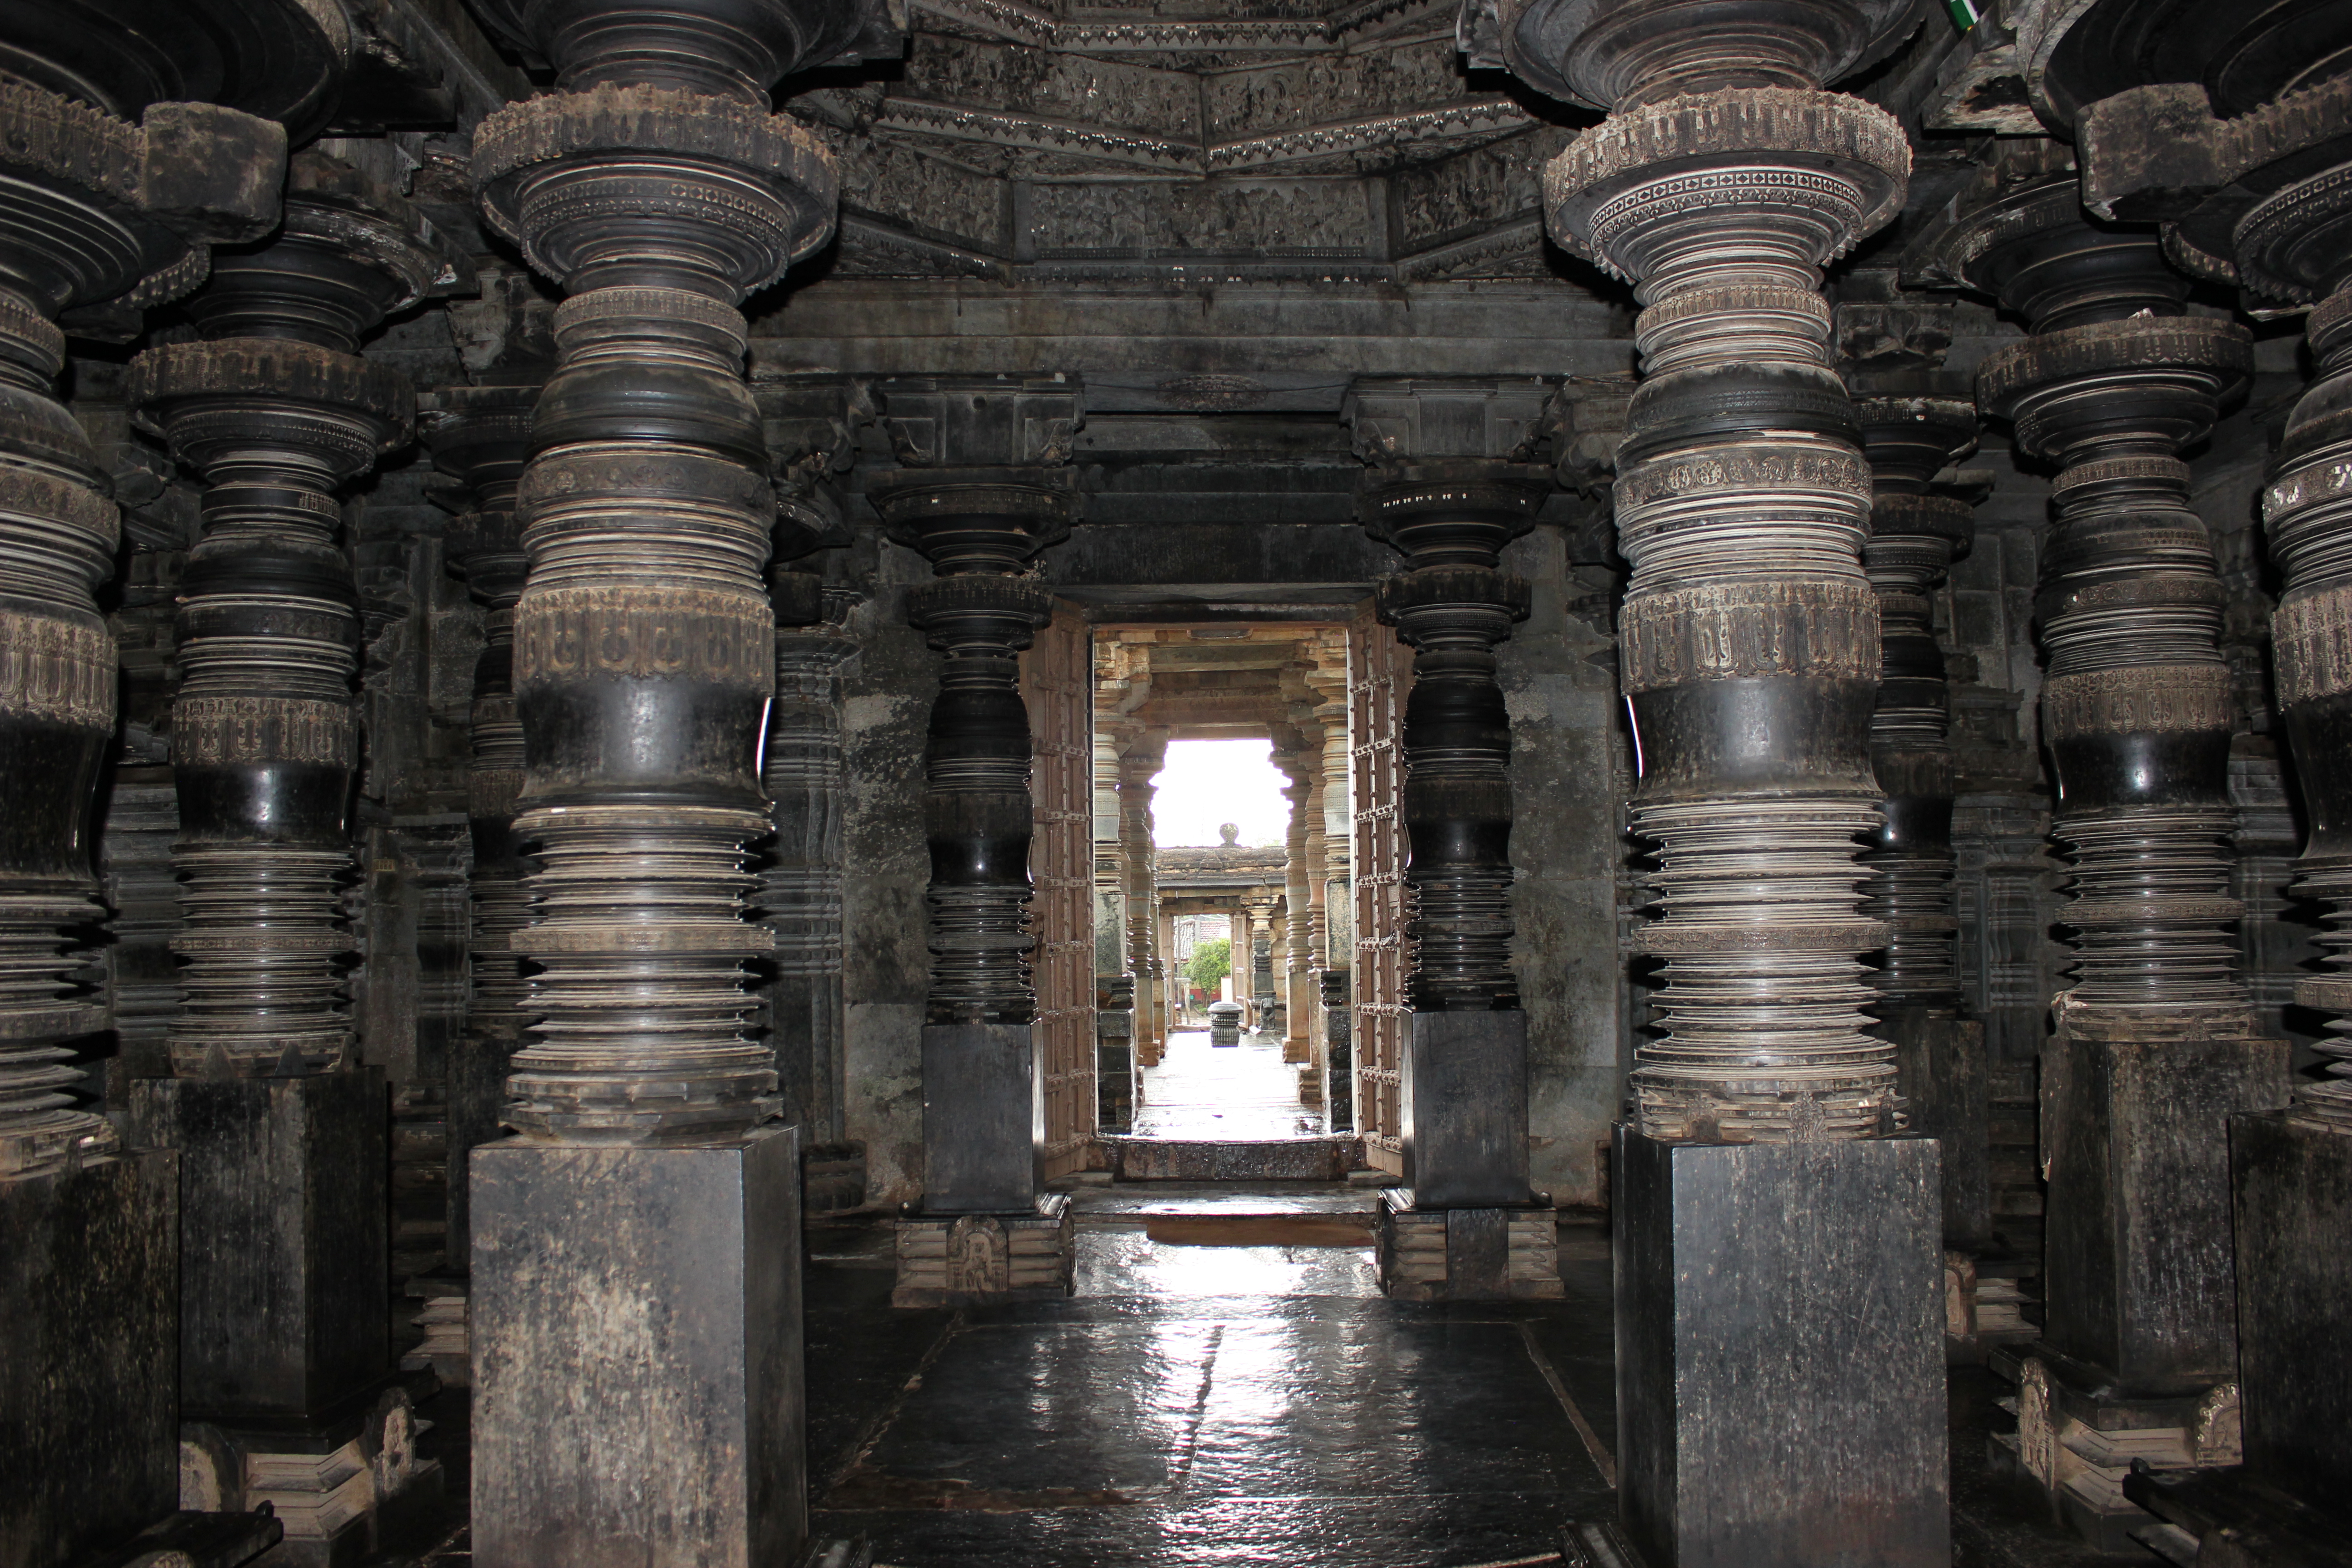 File:Lathe turned pillars support ceiling of closed mantapa in the ...